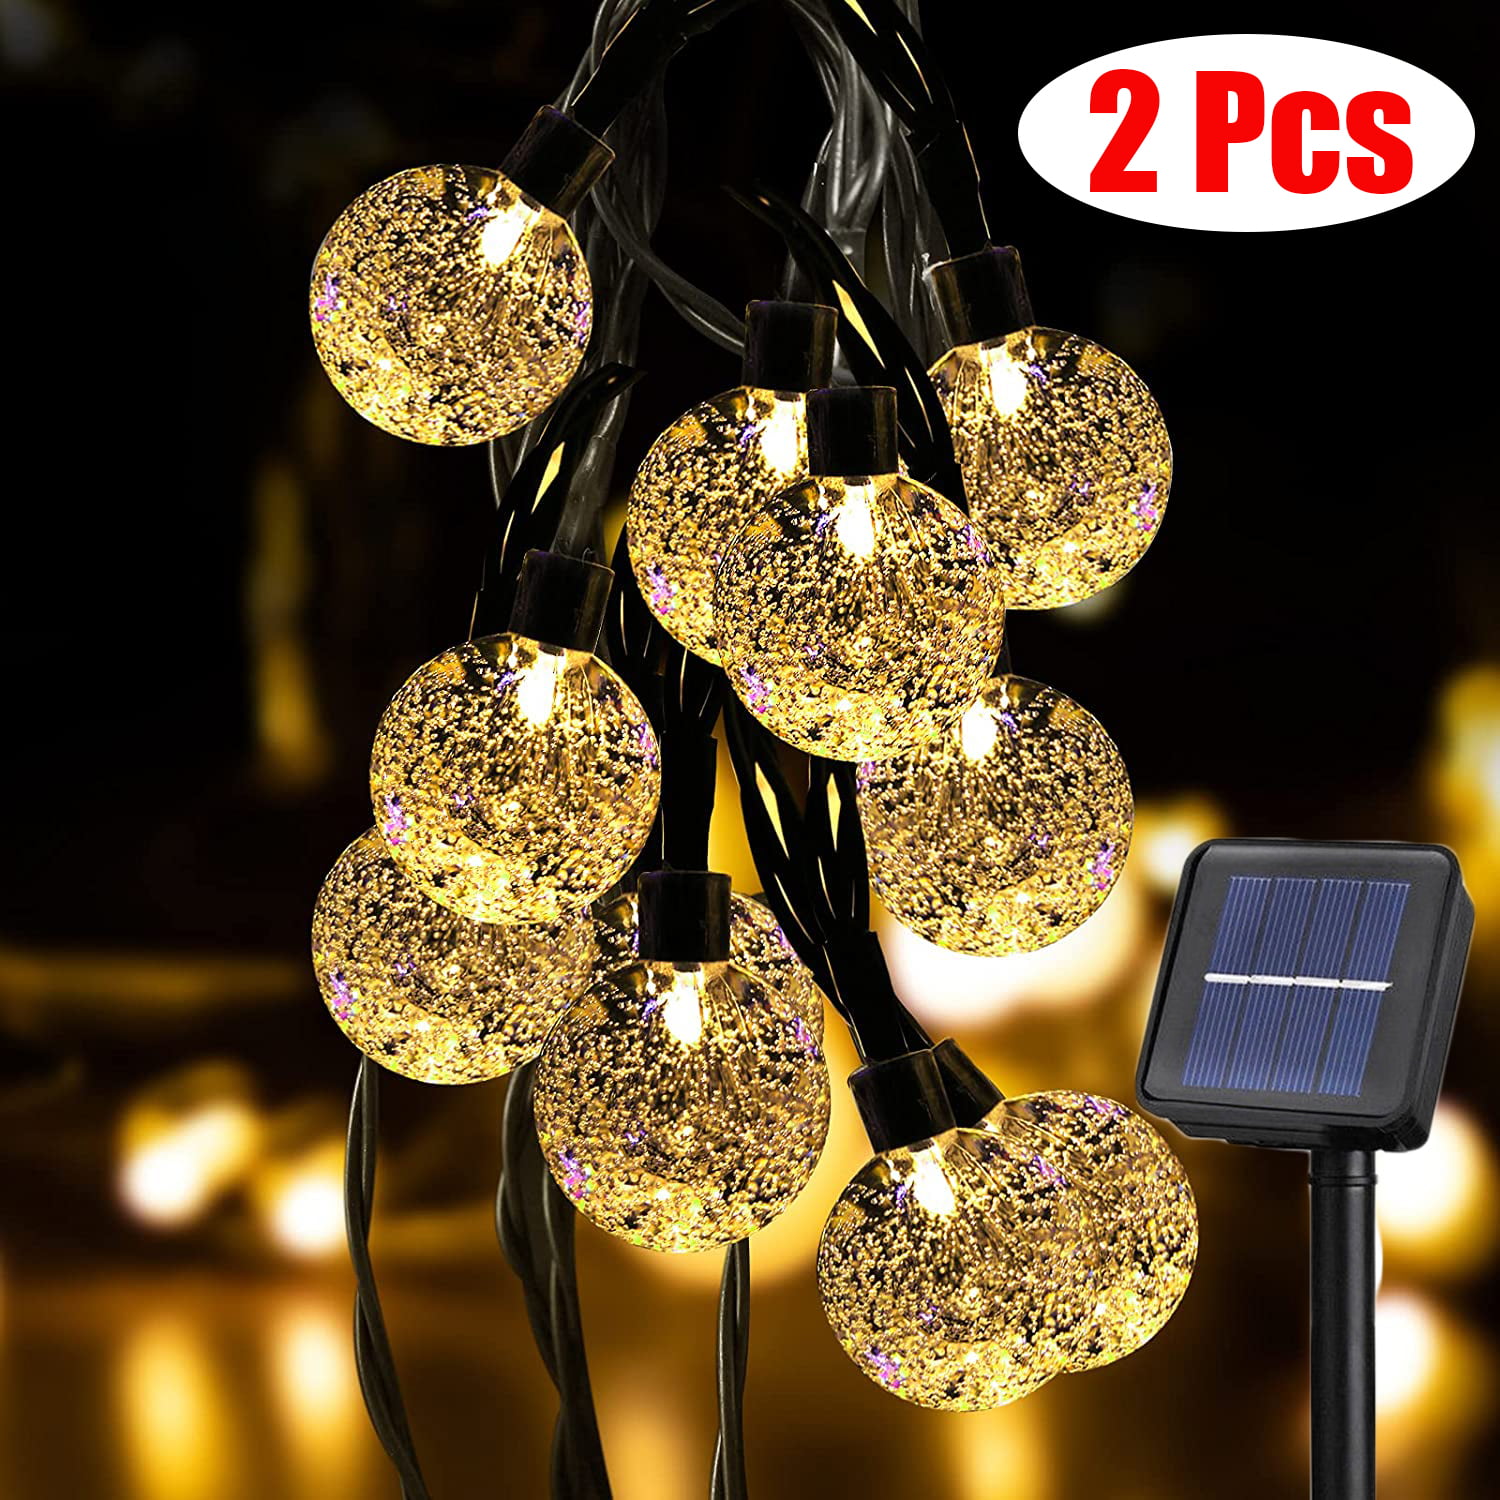 Warm White Patio Parties LED Solar Powered String Outdoor Lights Waterproof 23ft 50 LED Solar Powered Crystal Ball Decorative Lights with 8 Modes for Garden Christmas Tree Yard Home